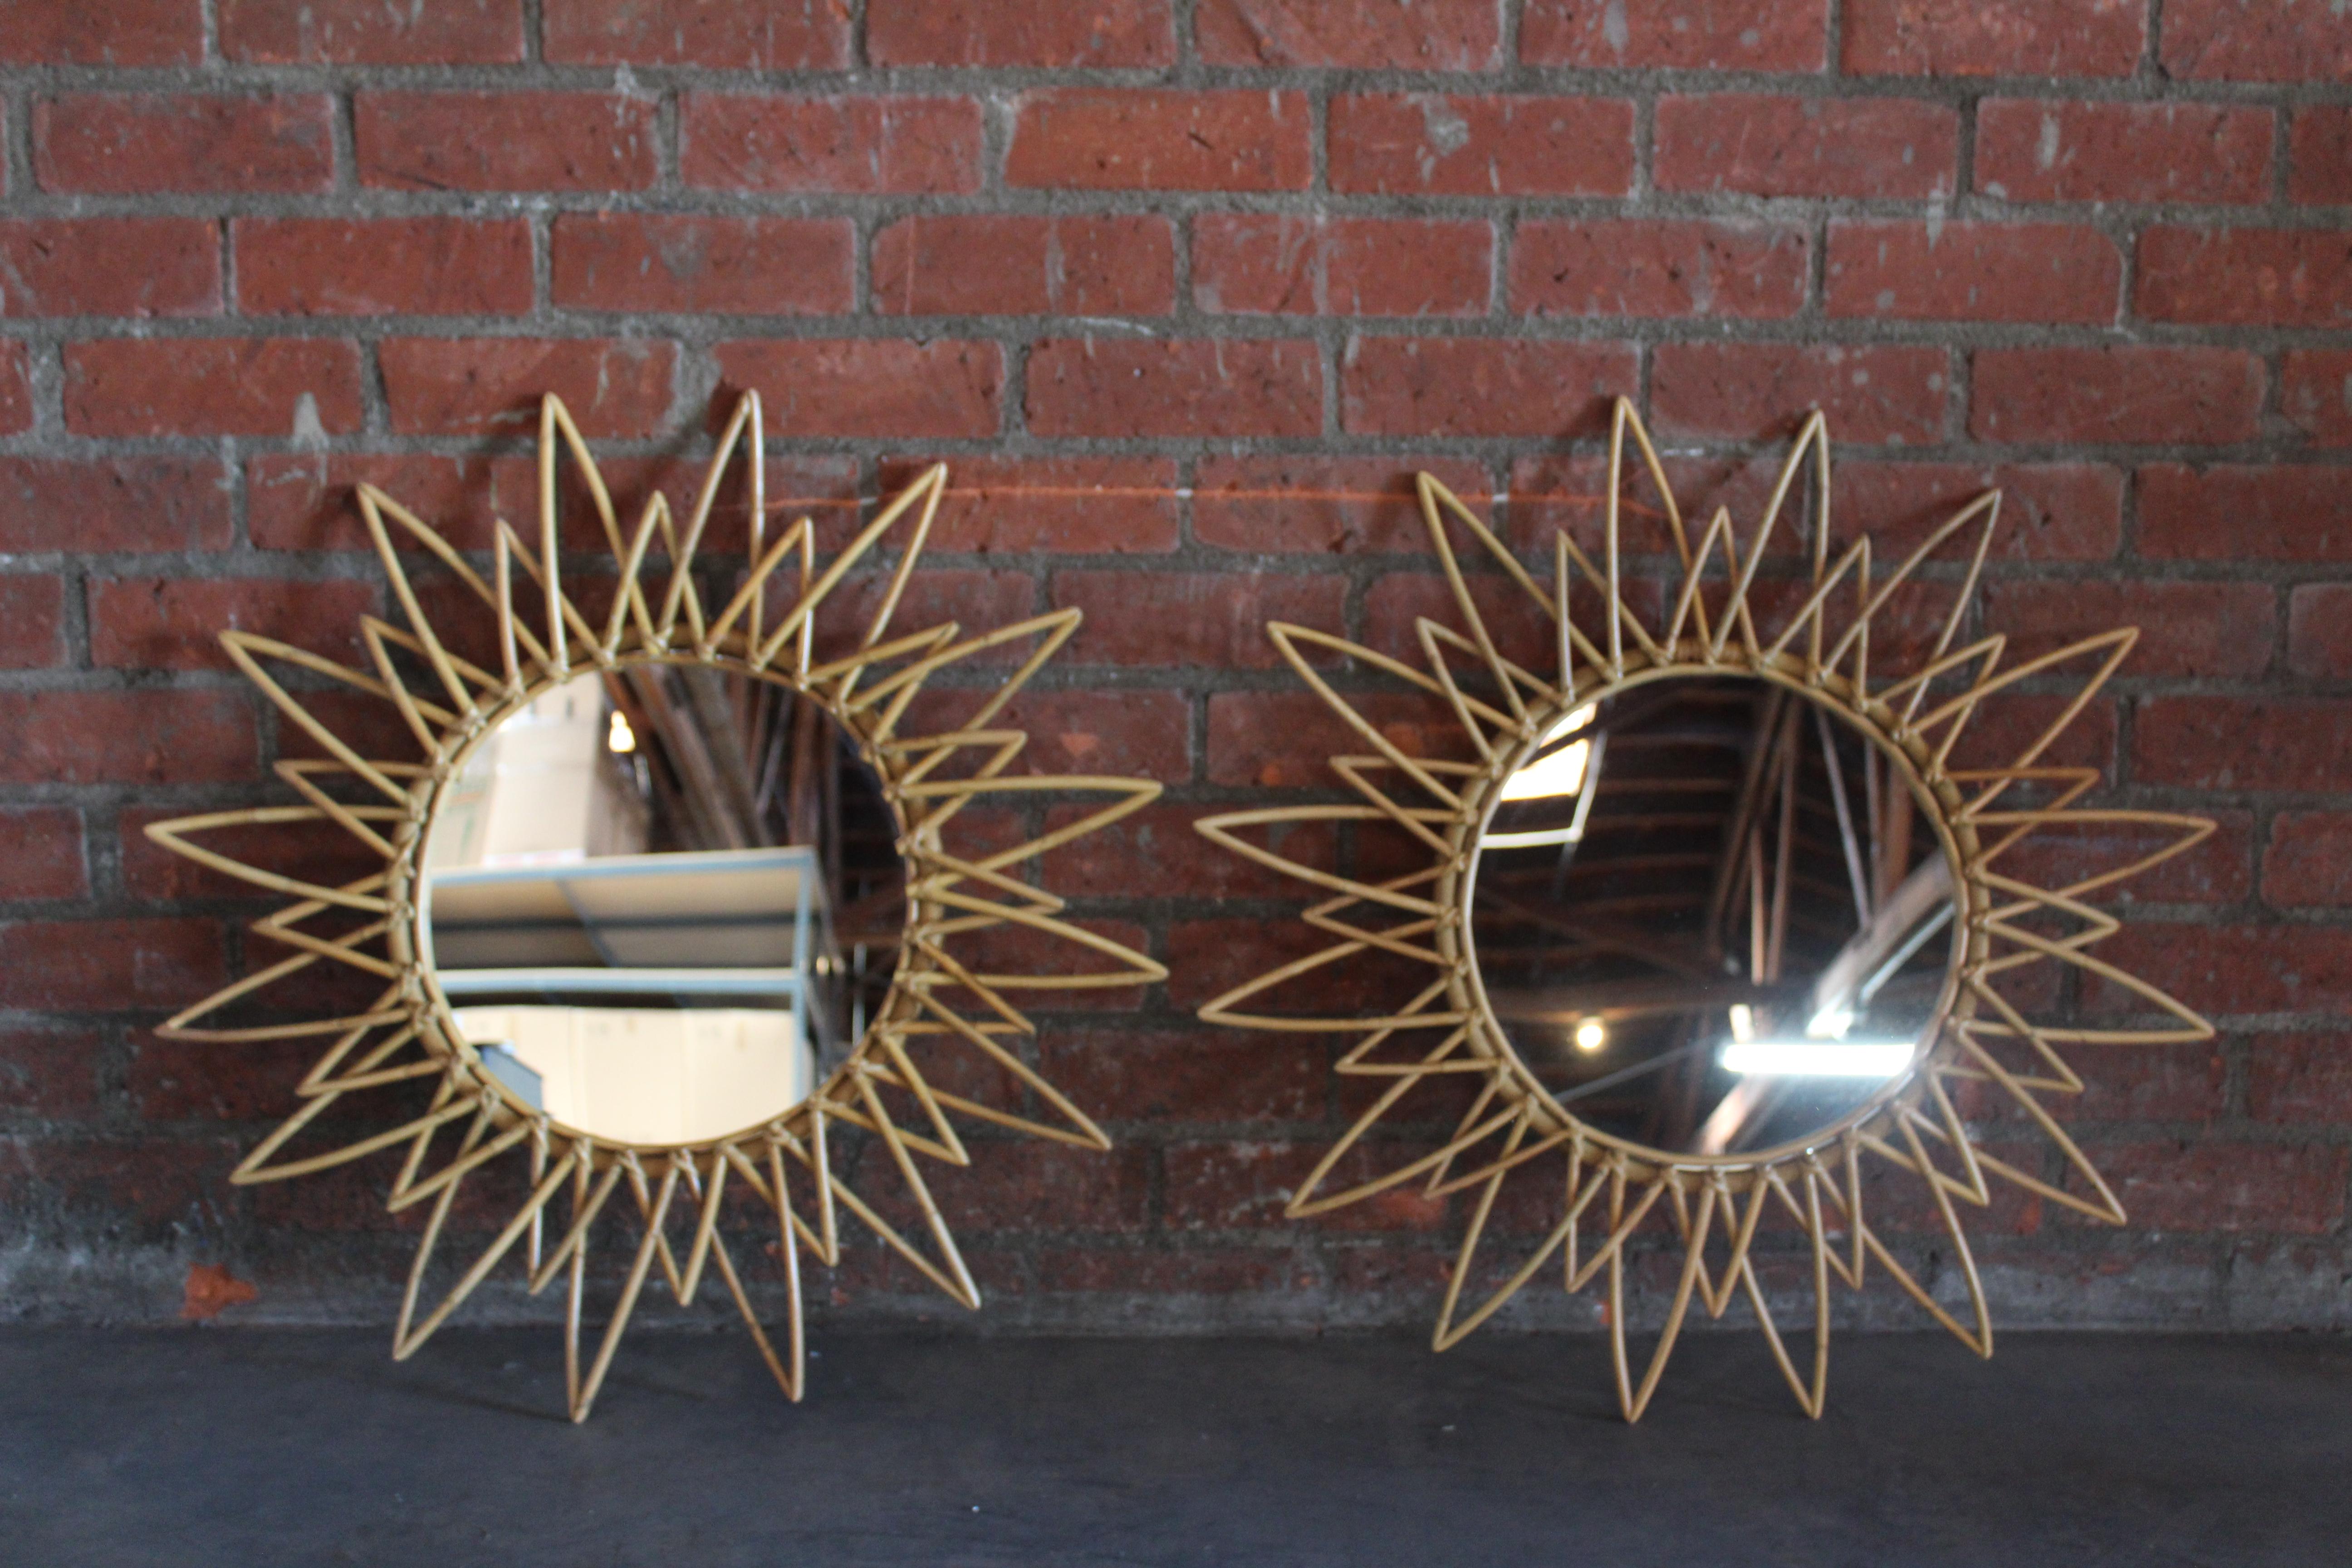 Vintage star sunbursts mirros made of bamboo, from Italy circa 1960s. In over all wonderful condition. Pair available. Sold individually.